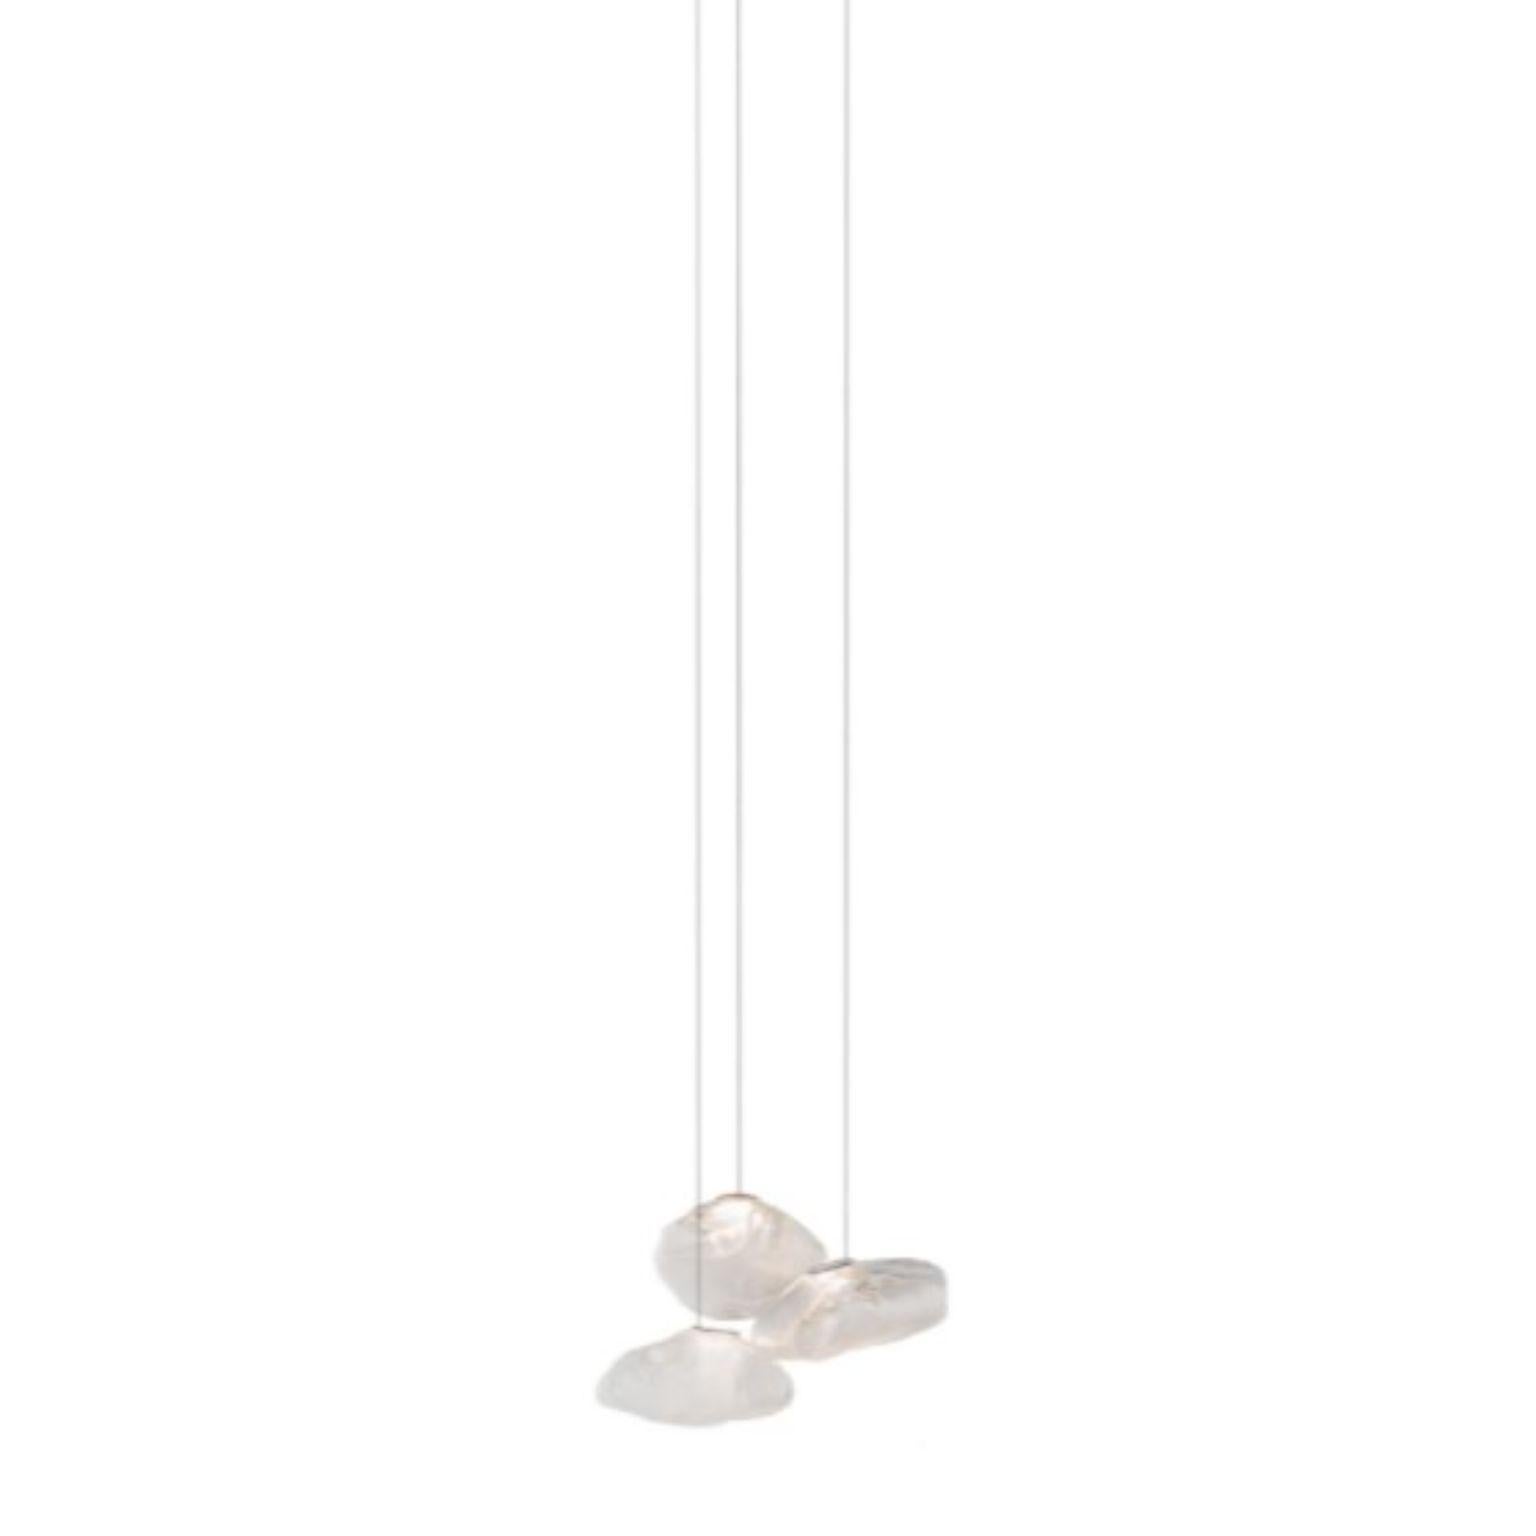 73.3 pendant by Bocci
Dimensions: D 20.3 x H 300 cm
Materials: brushed nickel round canopy
Weight: 8 kg
Also available in different dimensions and colours.

All our lamps can be wired according to each country. If sold to the USA it will be